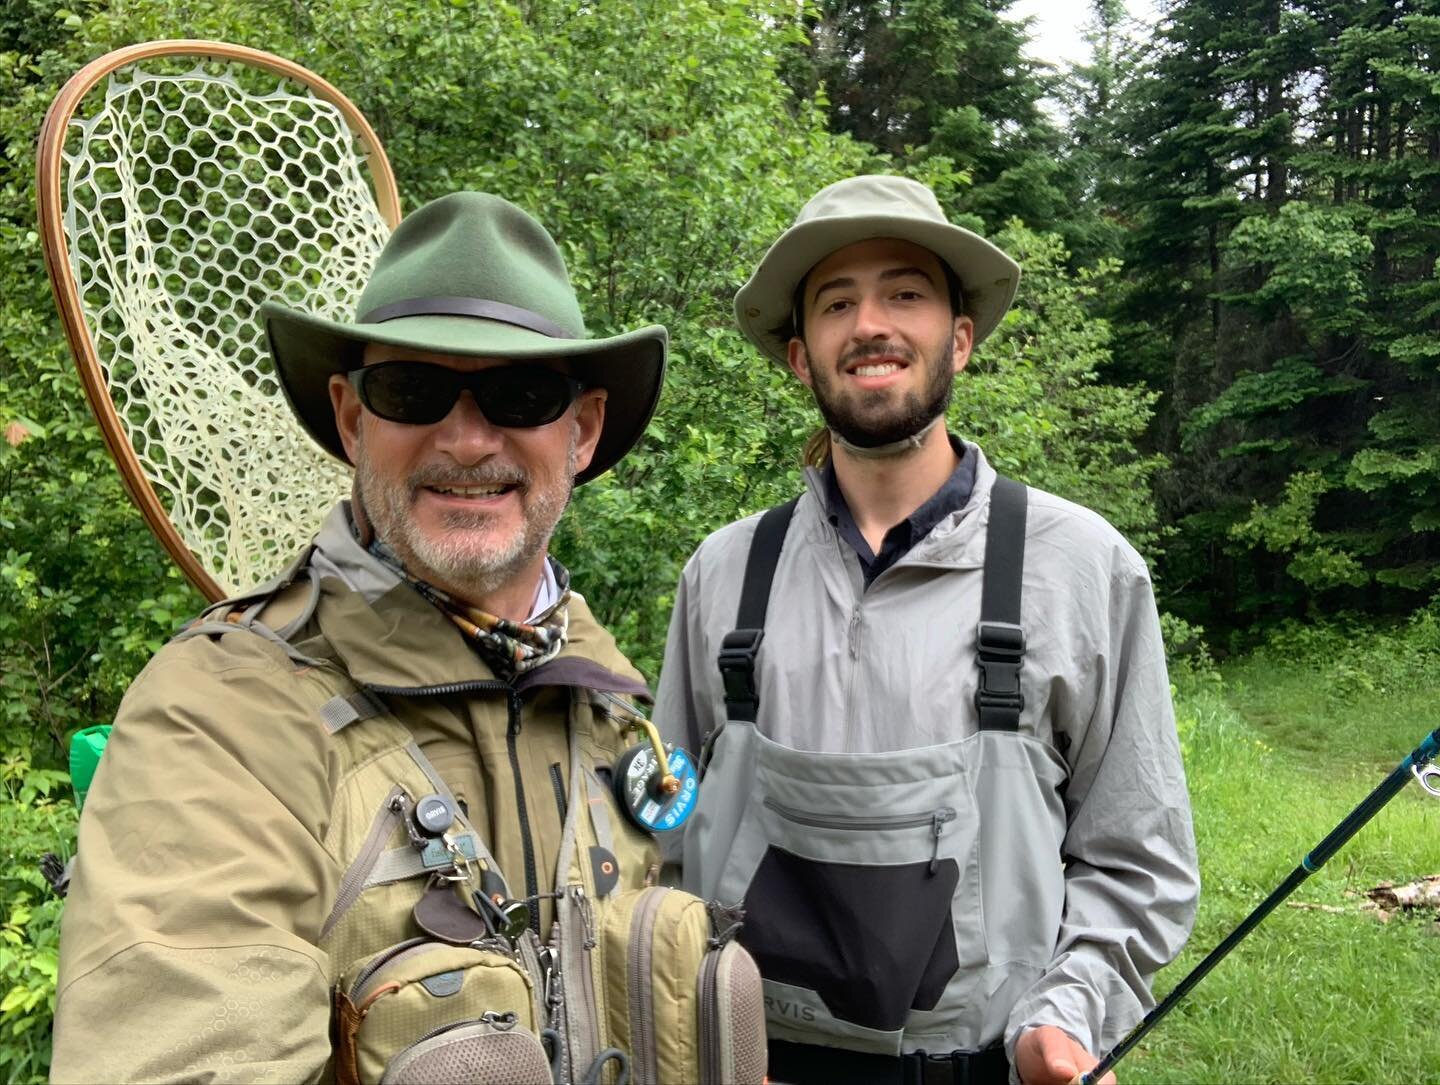 Wonderful day with first time fly fisher Nathaniel.